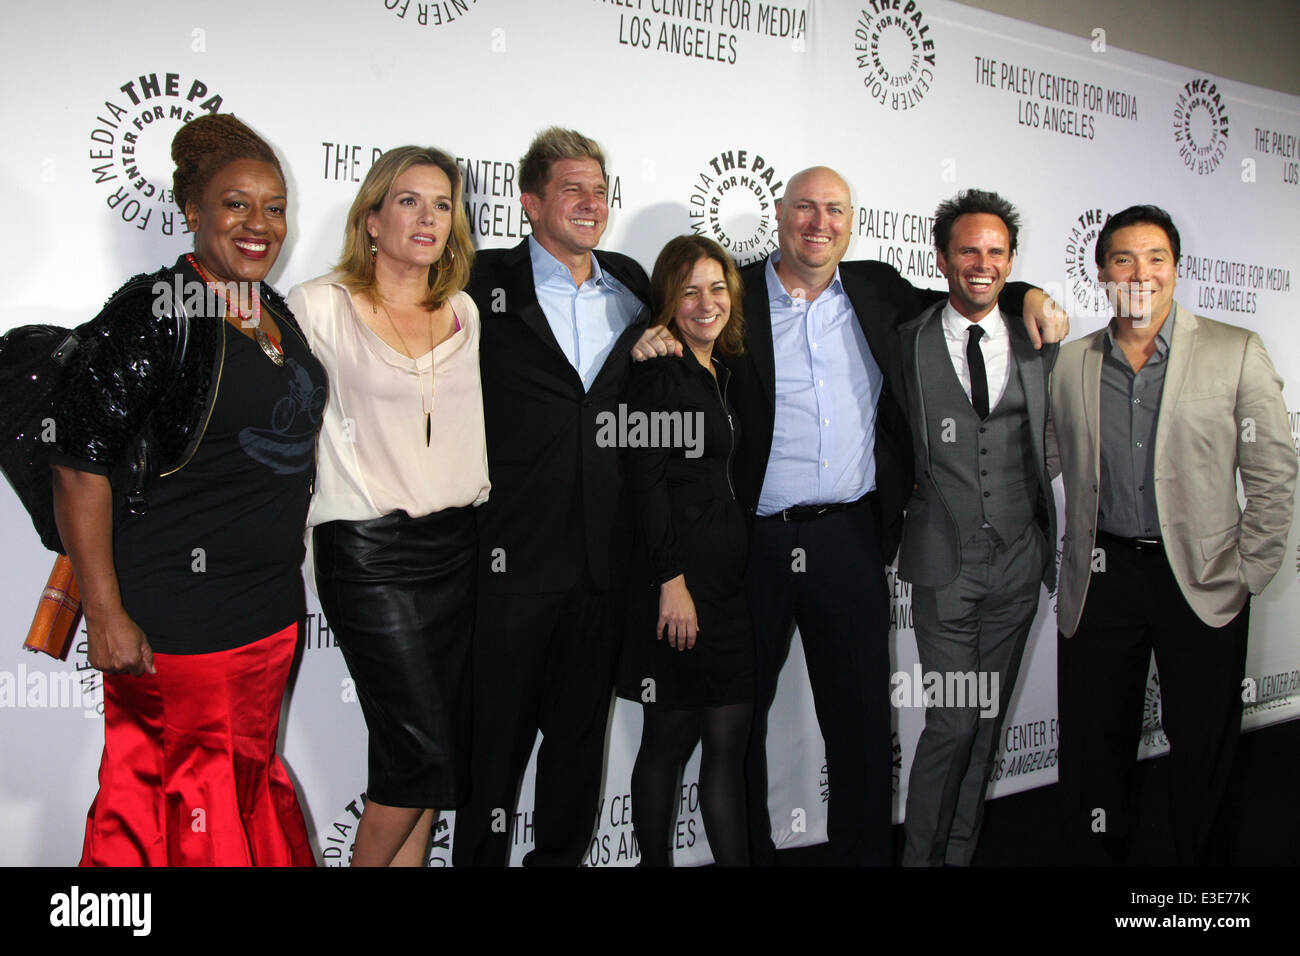 2013 Paley Center for Media Benefit Gala honoring FX Network on the 21st Century Fox Lot  Featuring: Shield Cast,CCH Pounder,Catherine Dent,Kenny Johnson,Cathy Ryan,Shawn Ryan,Walton Goggins,Benito Martinez Where: Century City, CA, United States When: 17 Oct 2013 Stock Photo